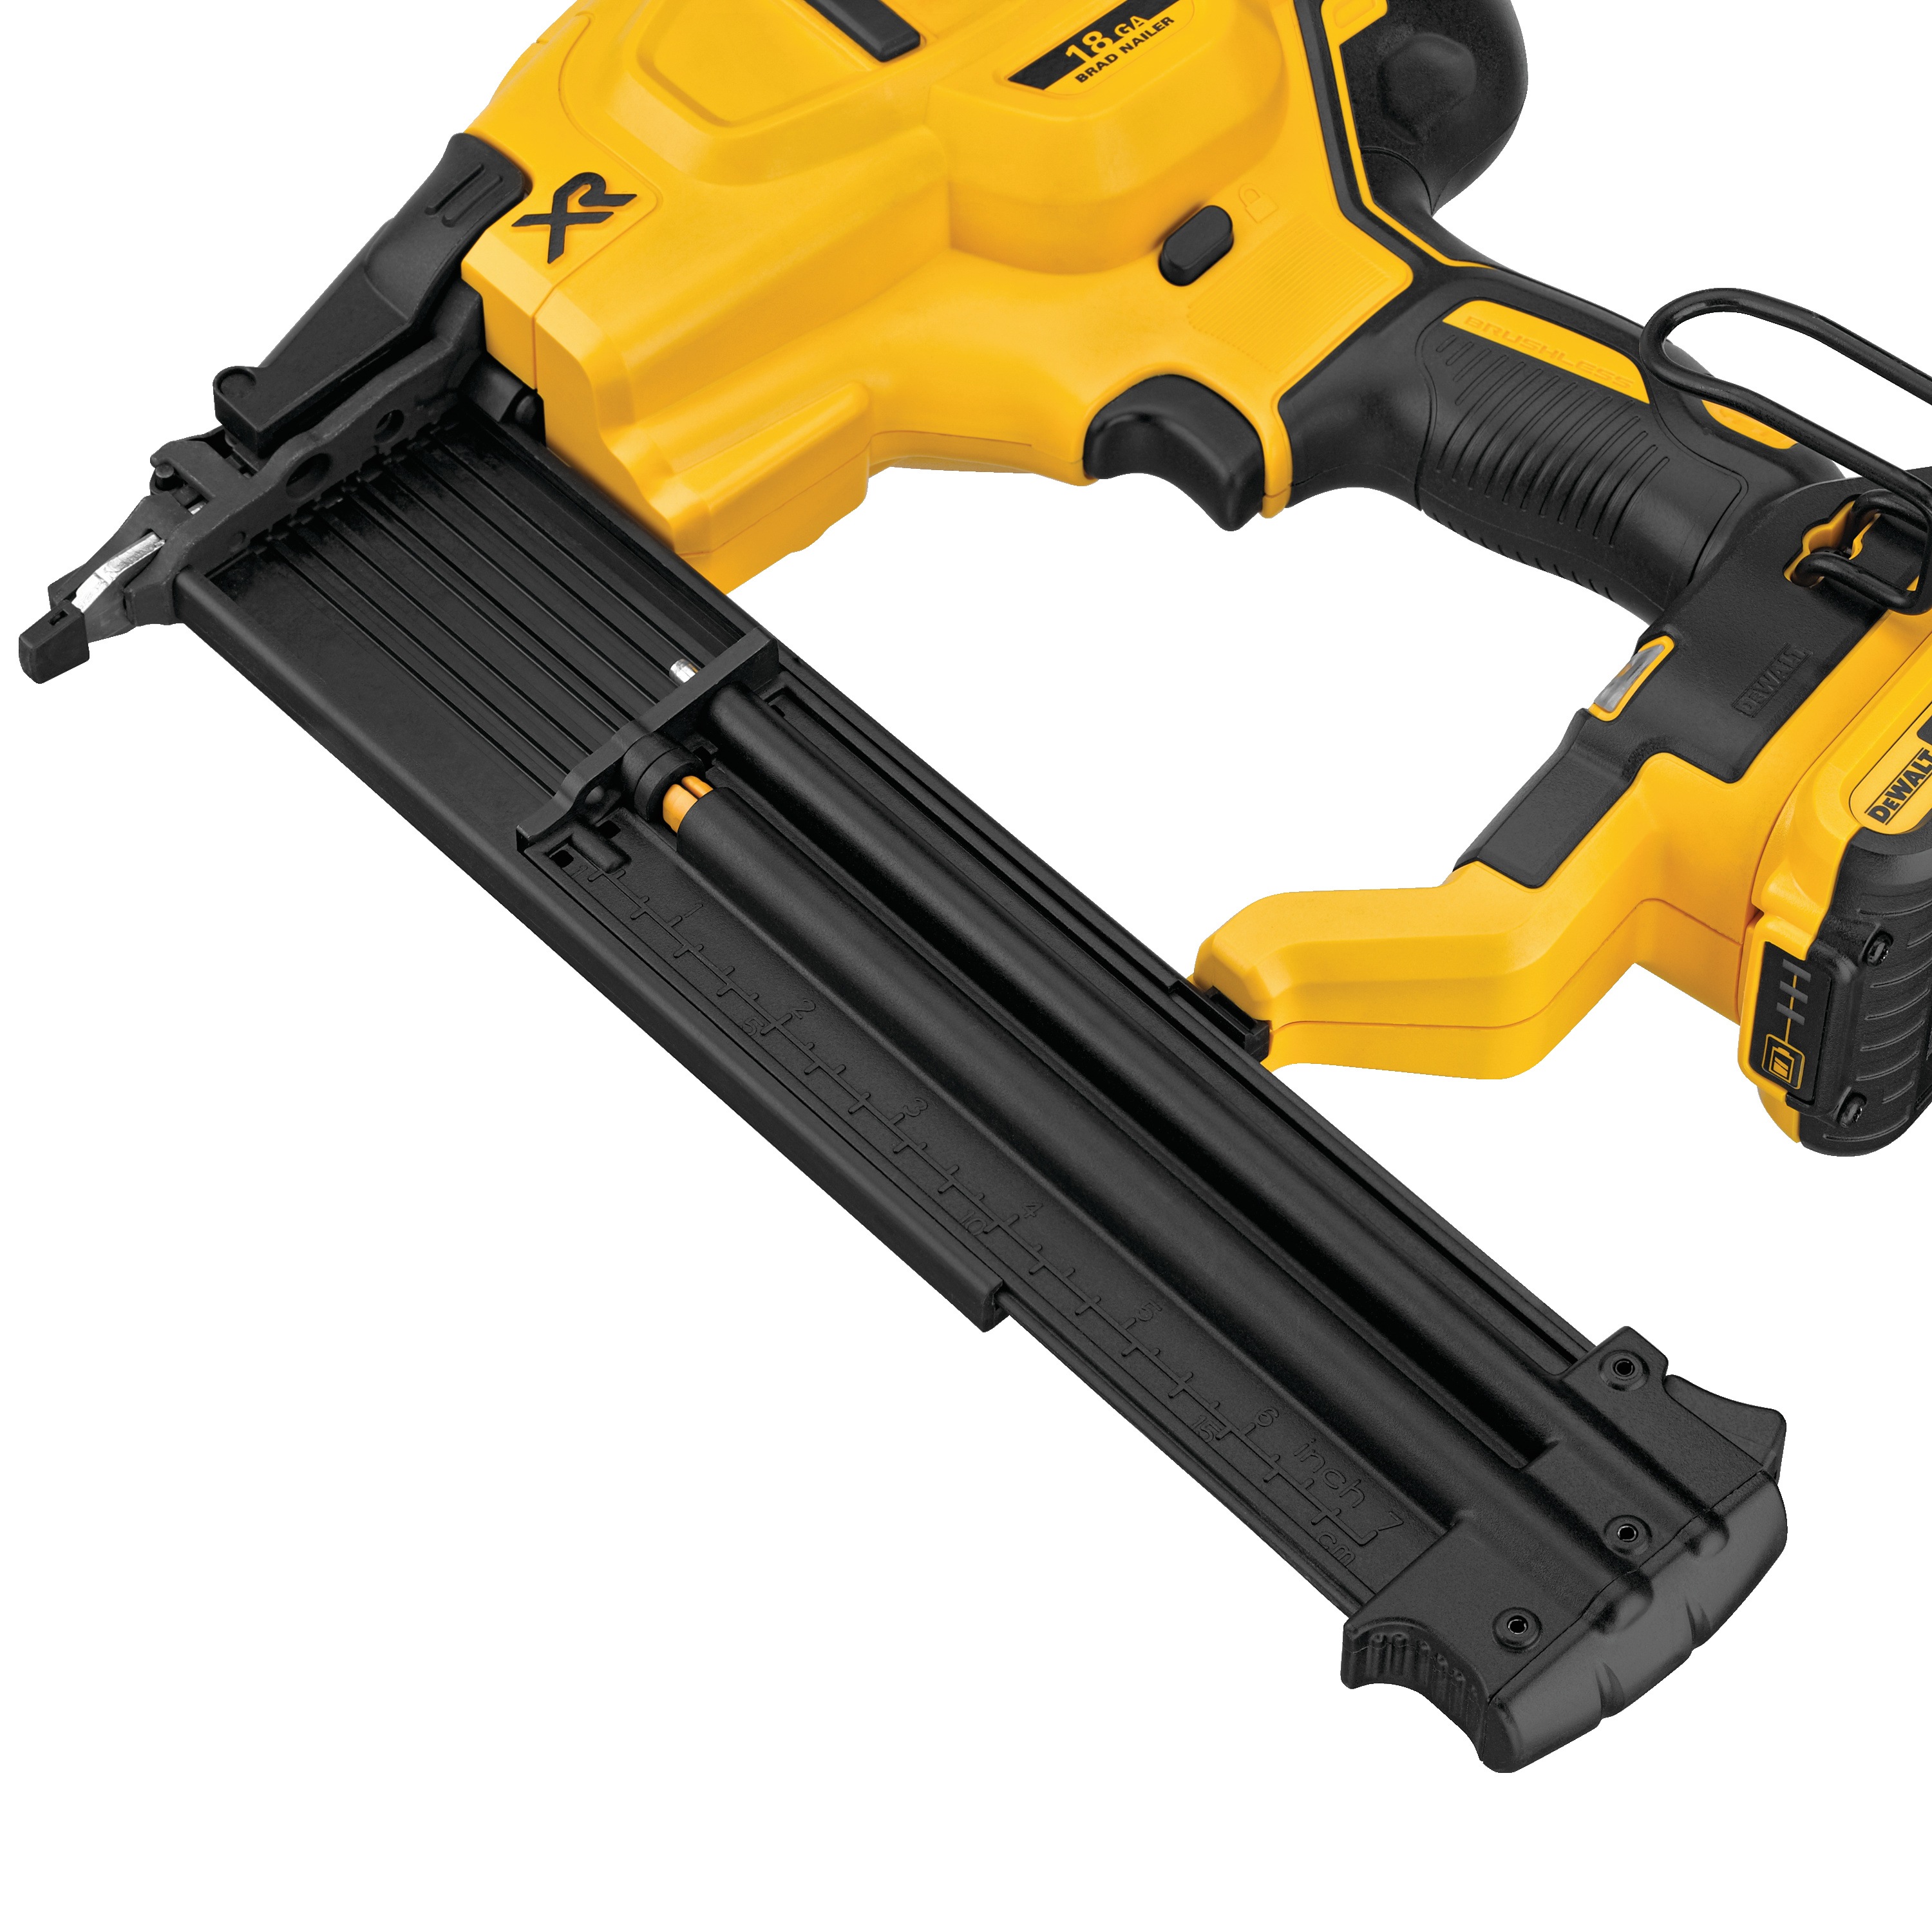 Close up of high capacity magazine feature of a  XR 18 gauge Cordless Brad Nailer